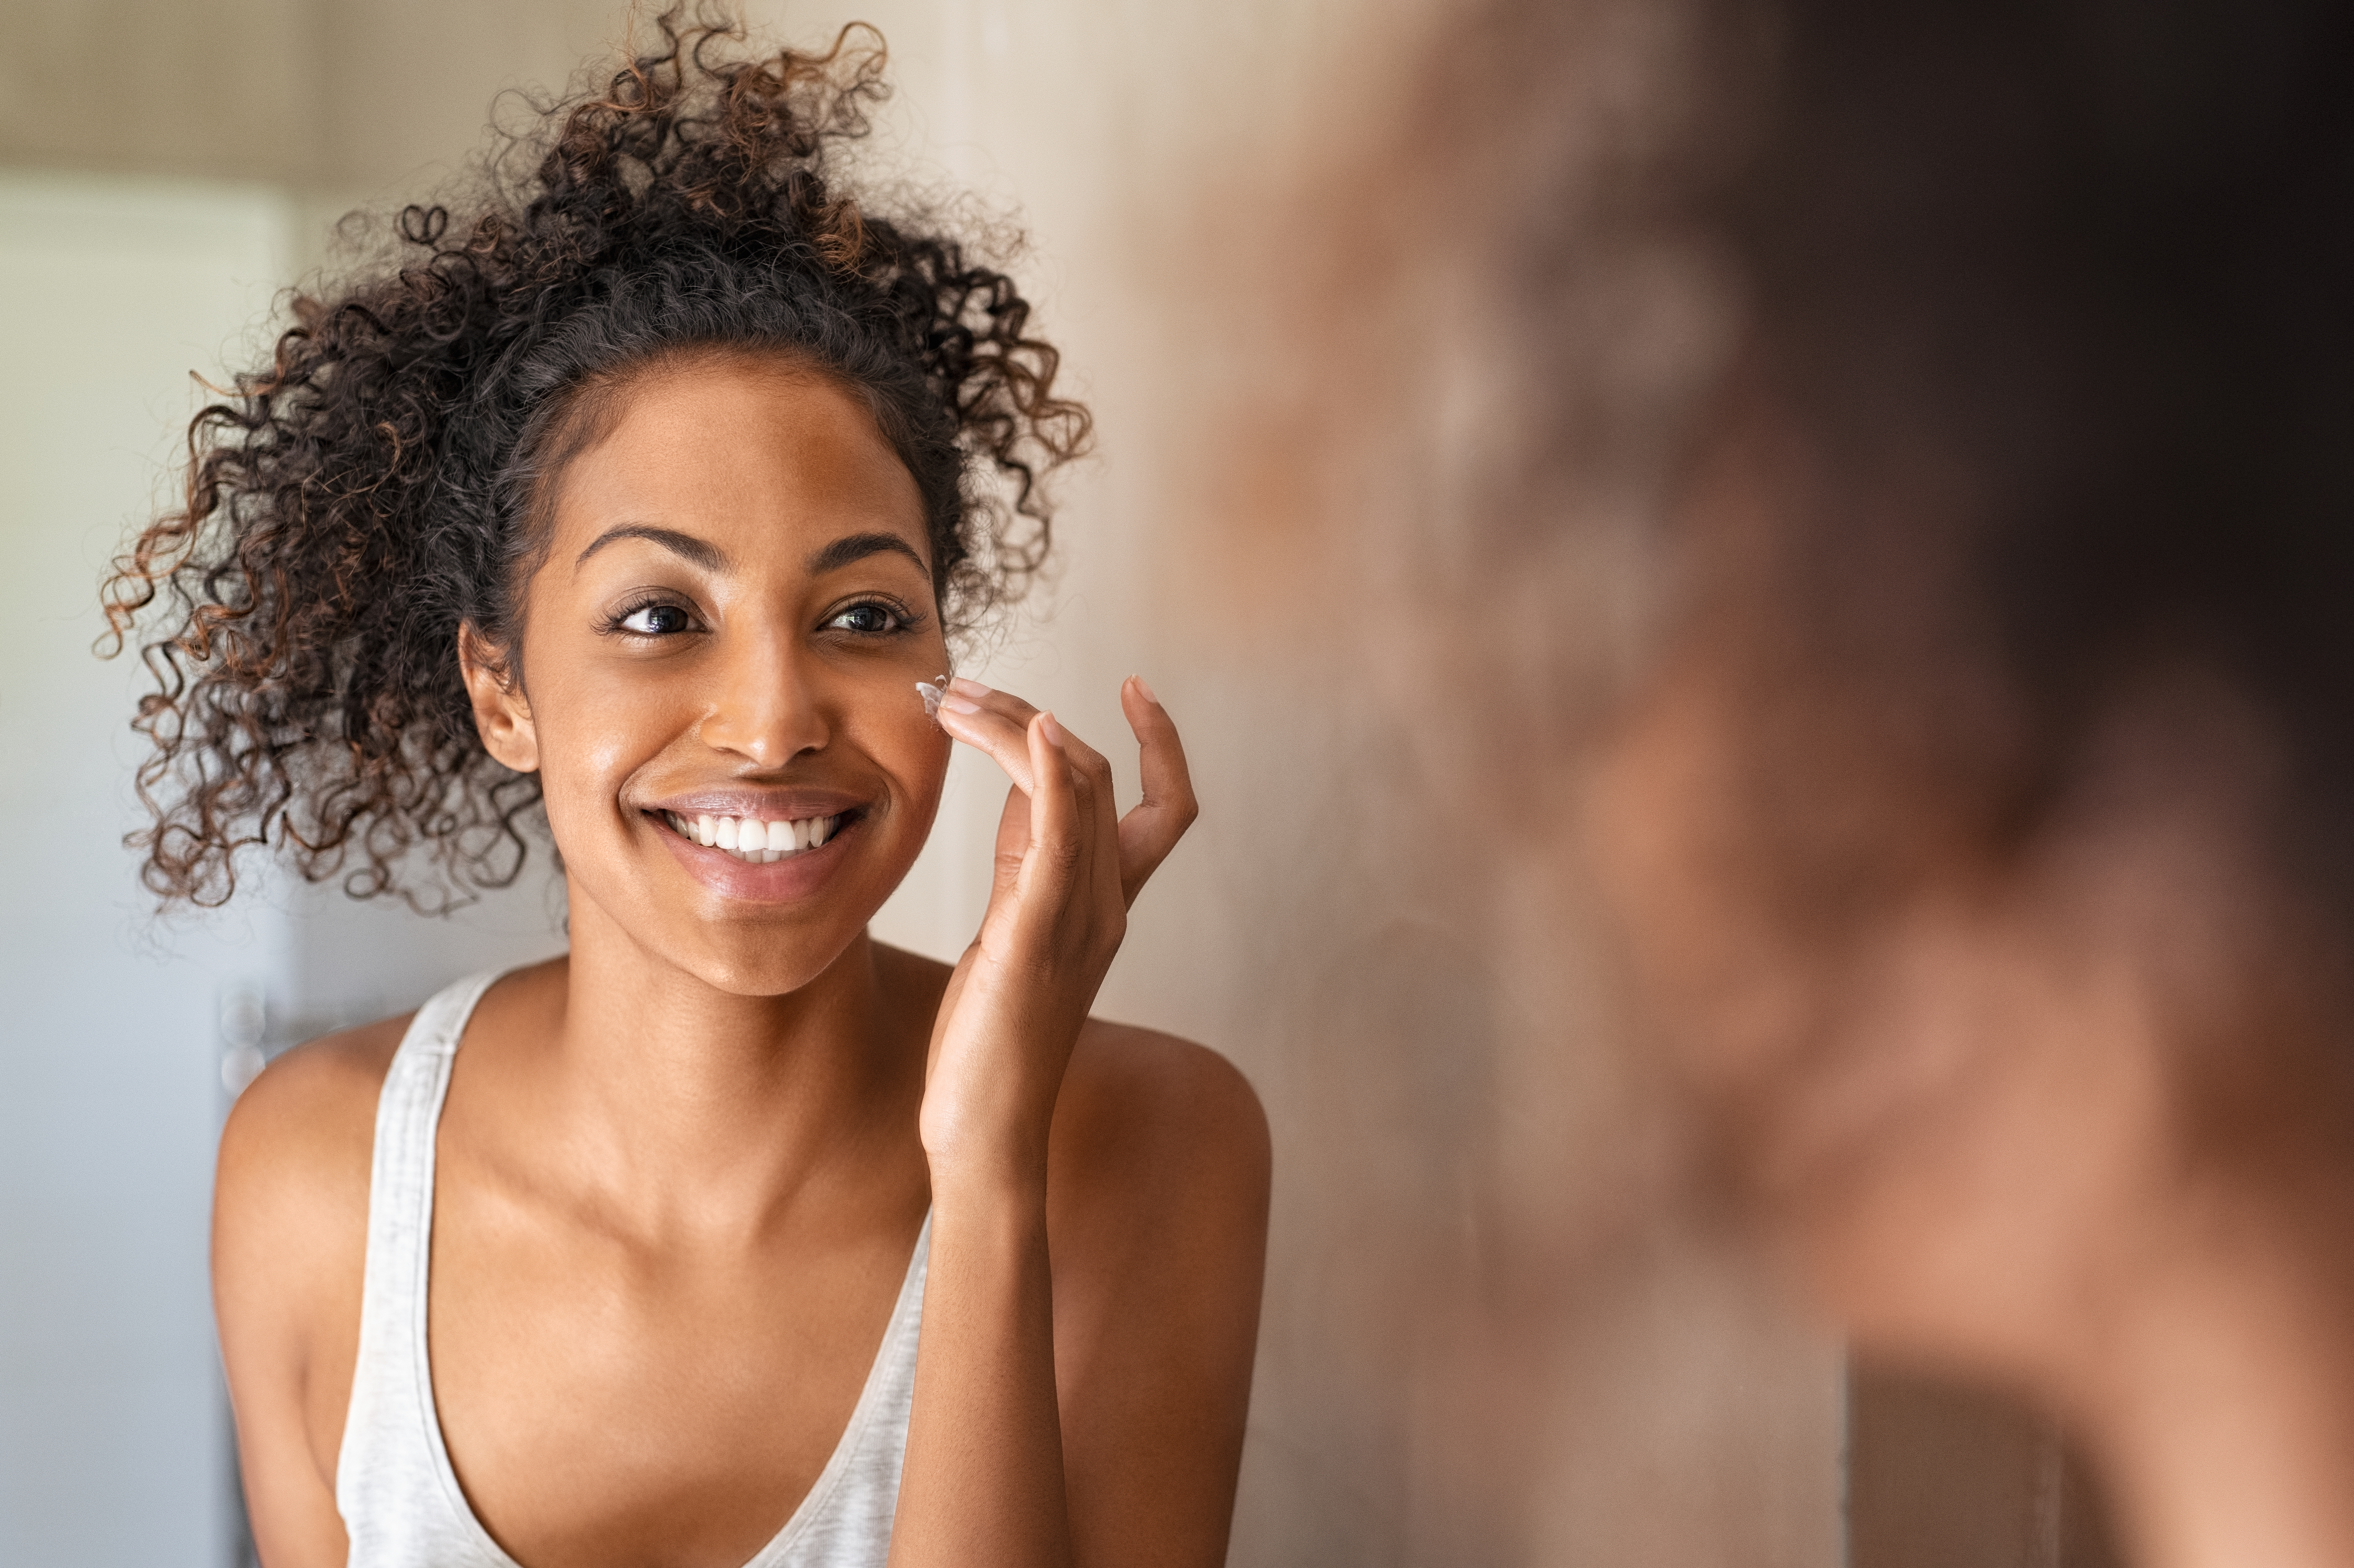 Stock photo of a young Black woman looking at herself in the mirror and smiling. 